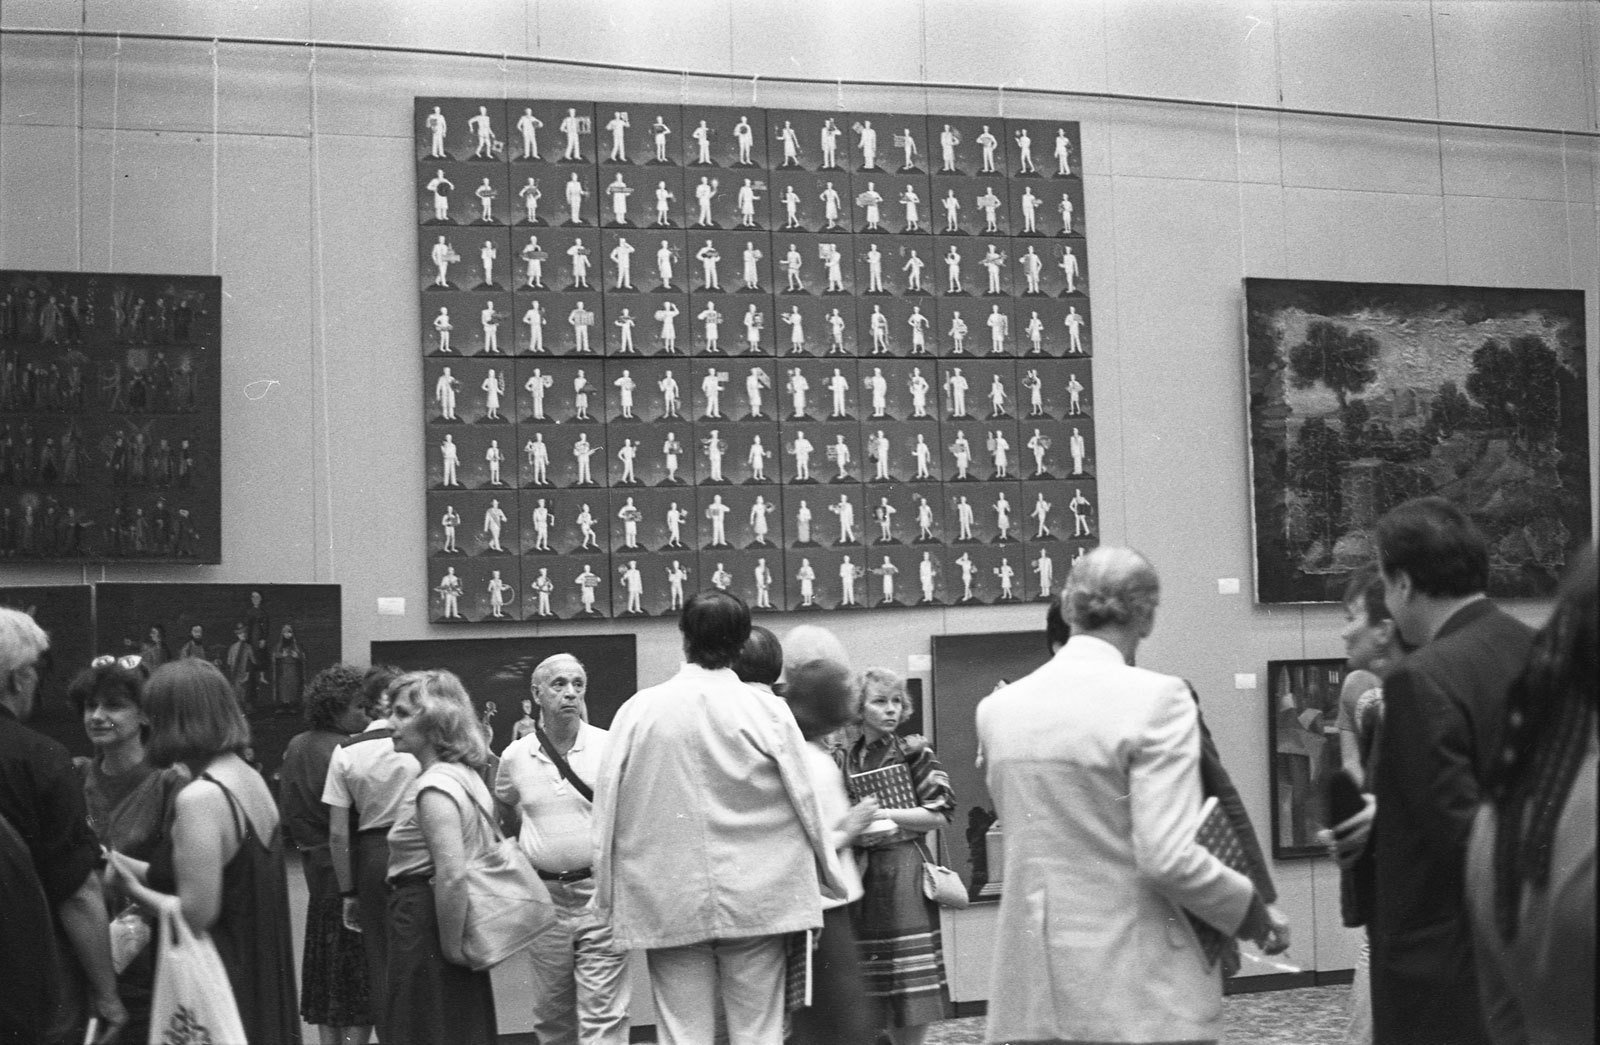 Pre-auction exhibition of Sotheby&rsquo;s Russian Avant-Garde and Soviet Contemporary Art at Sovincentr, Moscow, July 2&ndash;7, 1988Photo: Alexander Lavrentiev&copy; Alexander Lavrentiev